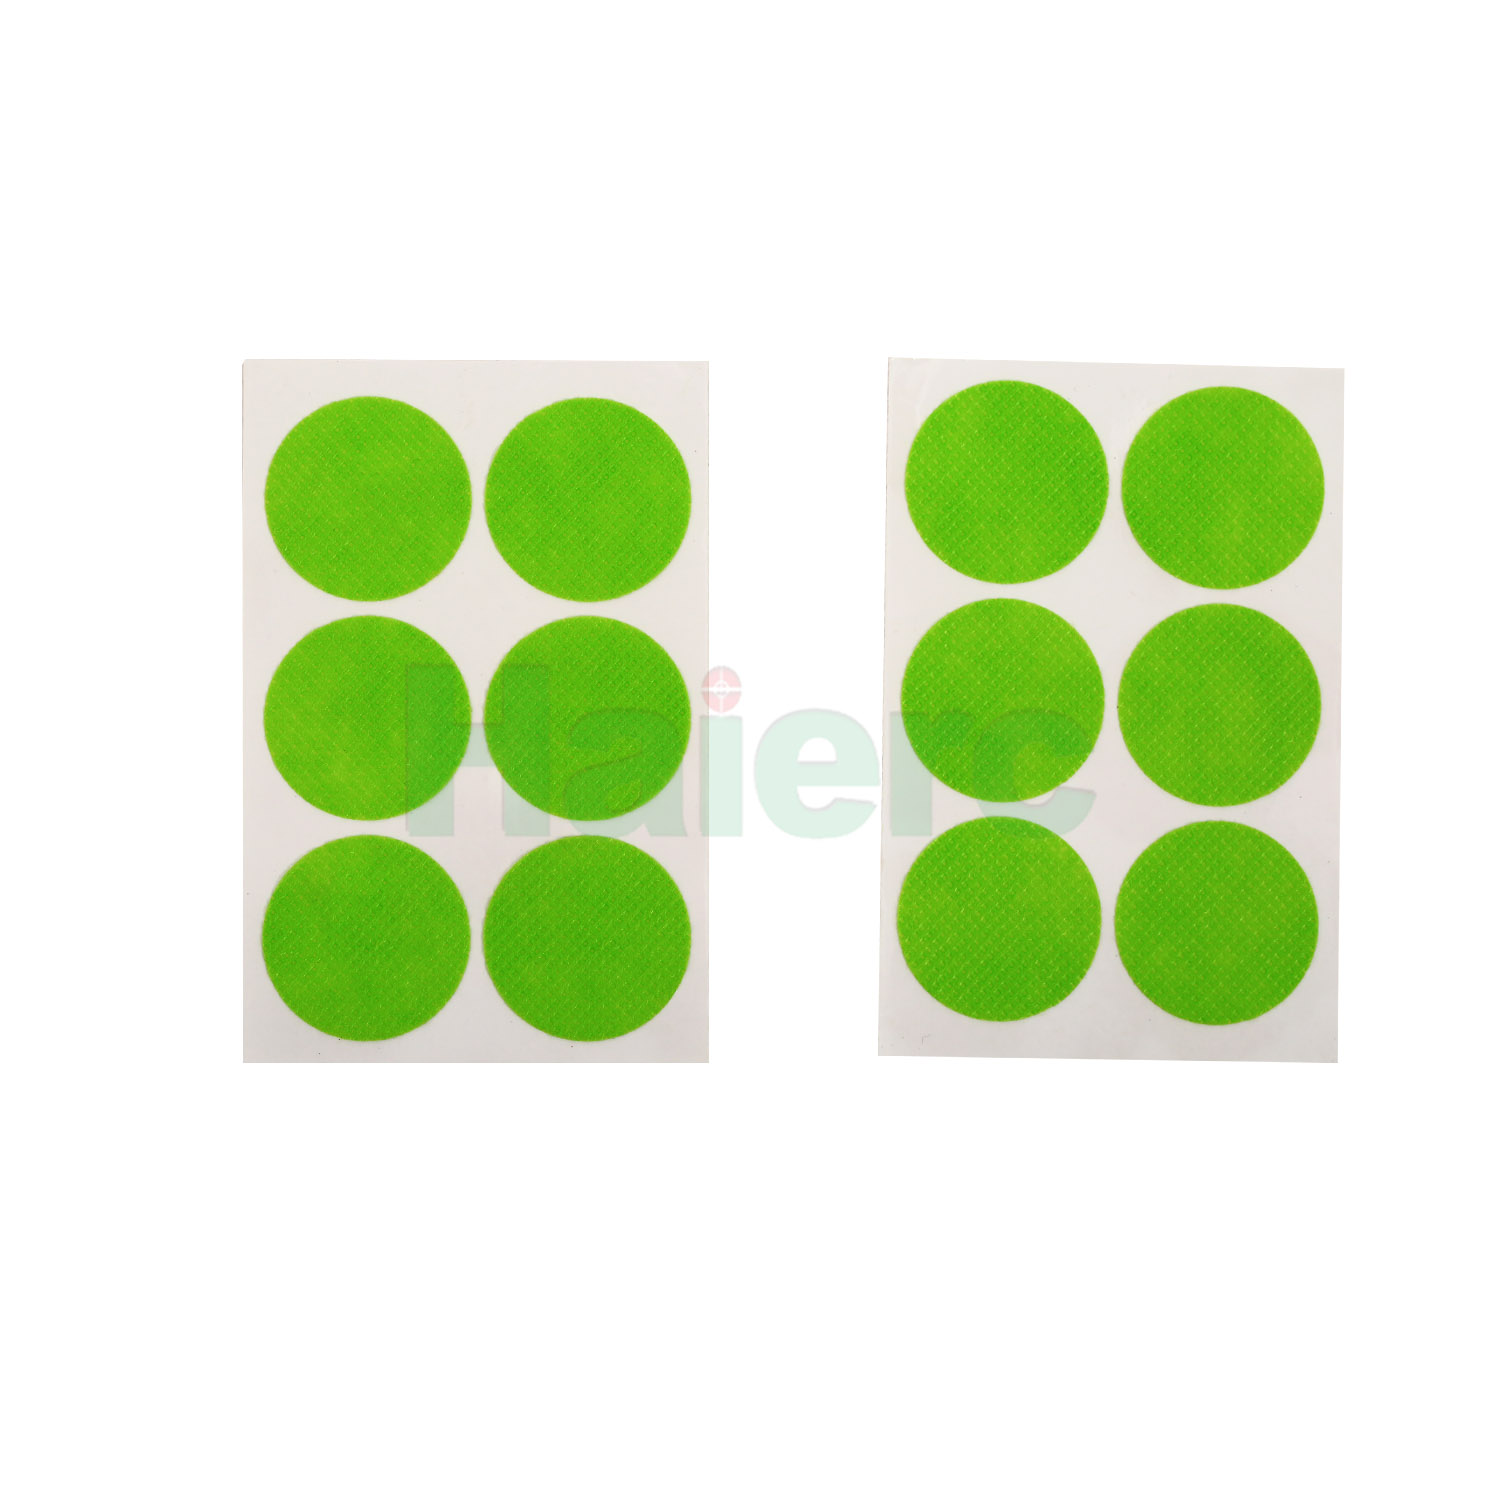 >Haierc Natural Non-toxic Anti Mosquito Repellent Patches Stickers for Kids Adults Protection Sticker HC6201